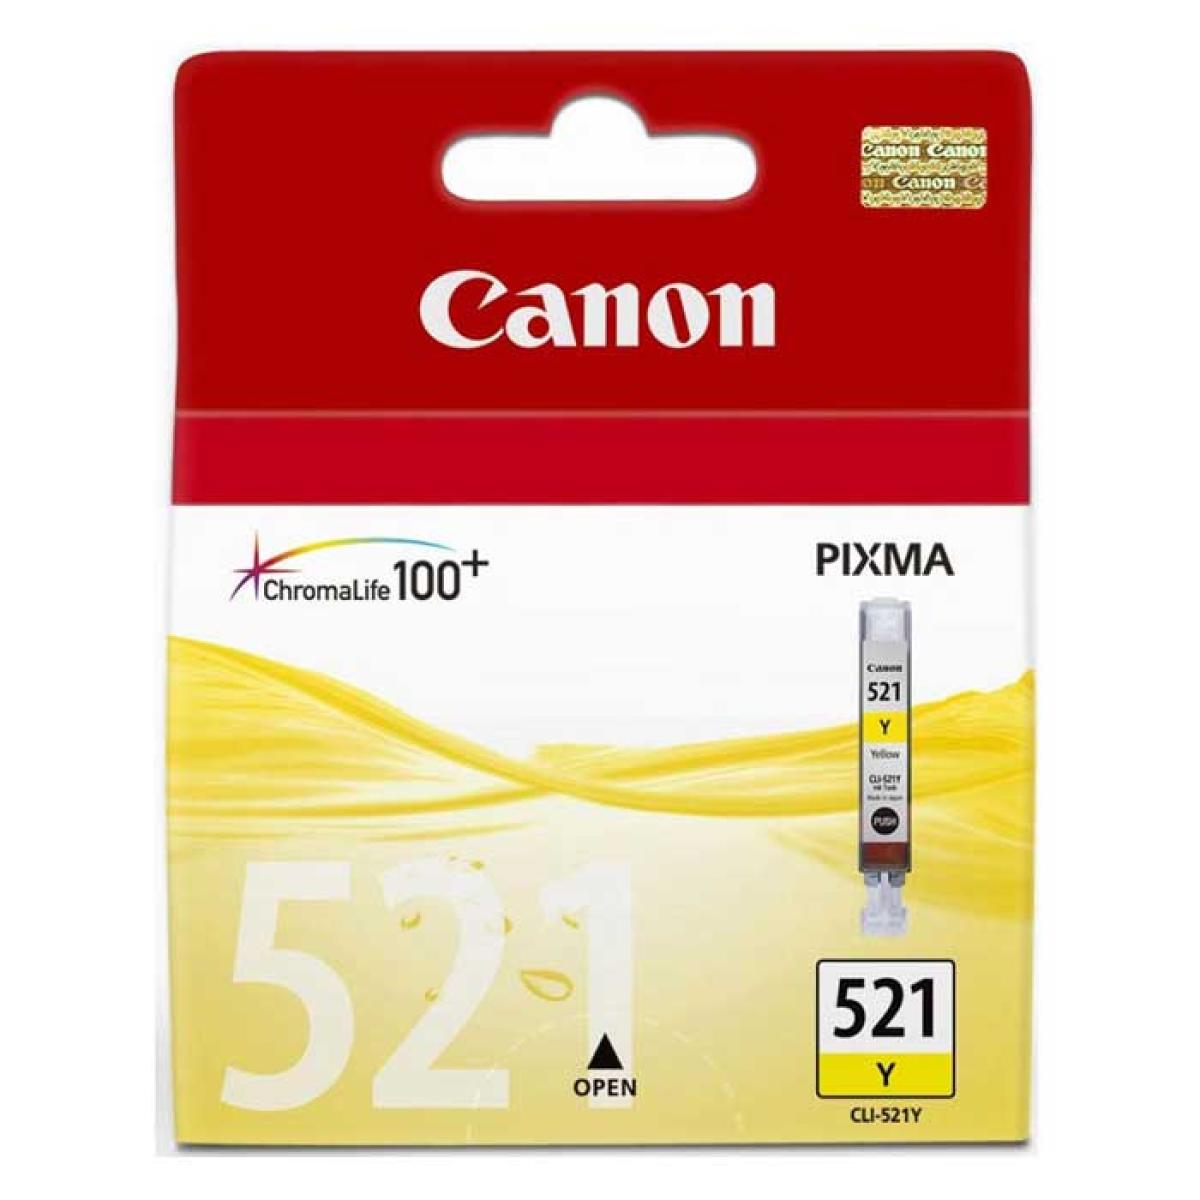 Canon CLI-521Y Yellow Inkjet Cartridge Compatible with IP3600.IP4700, MP540, MP560